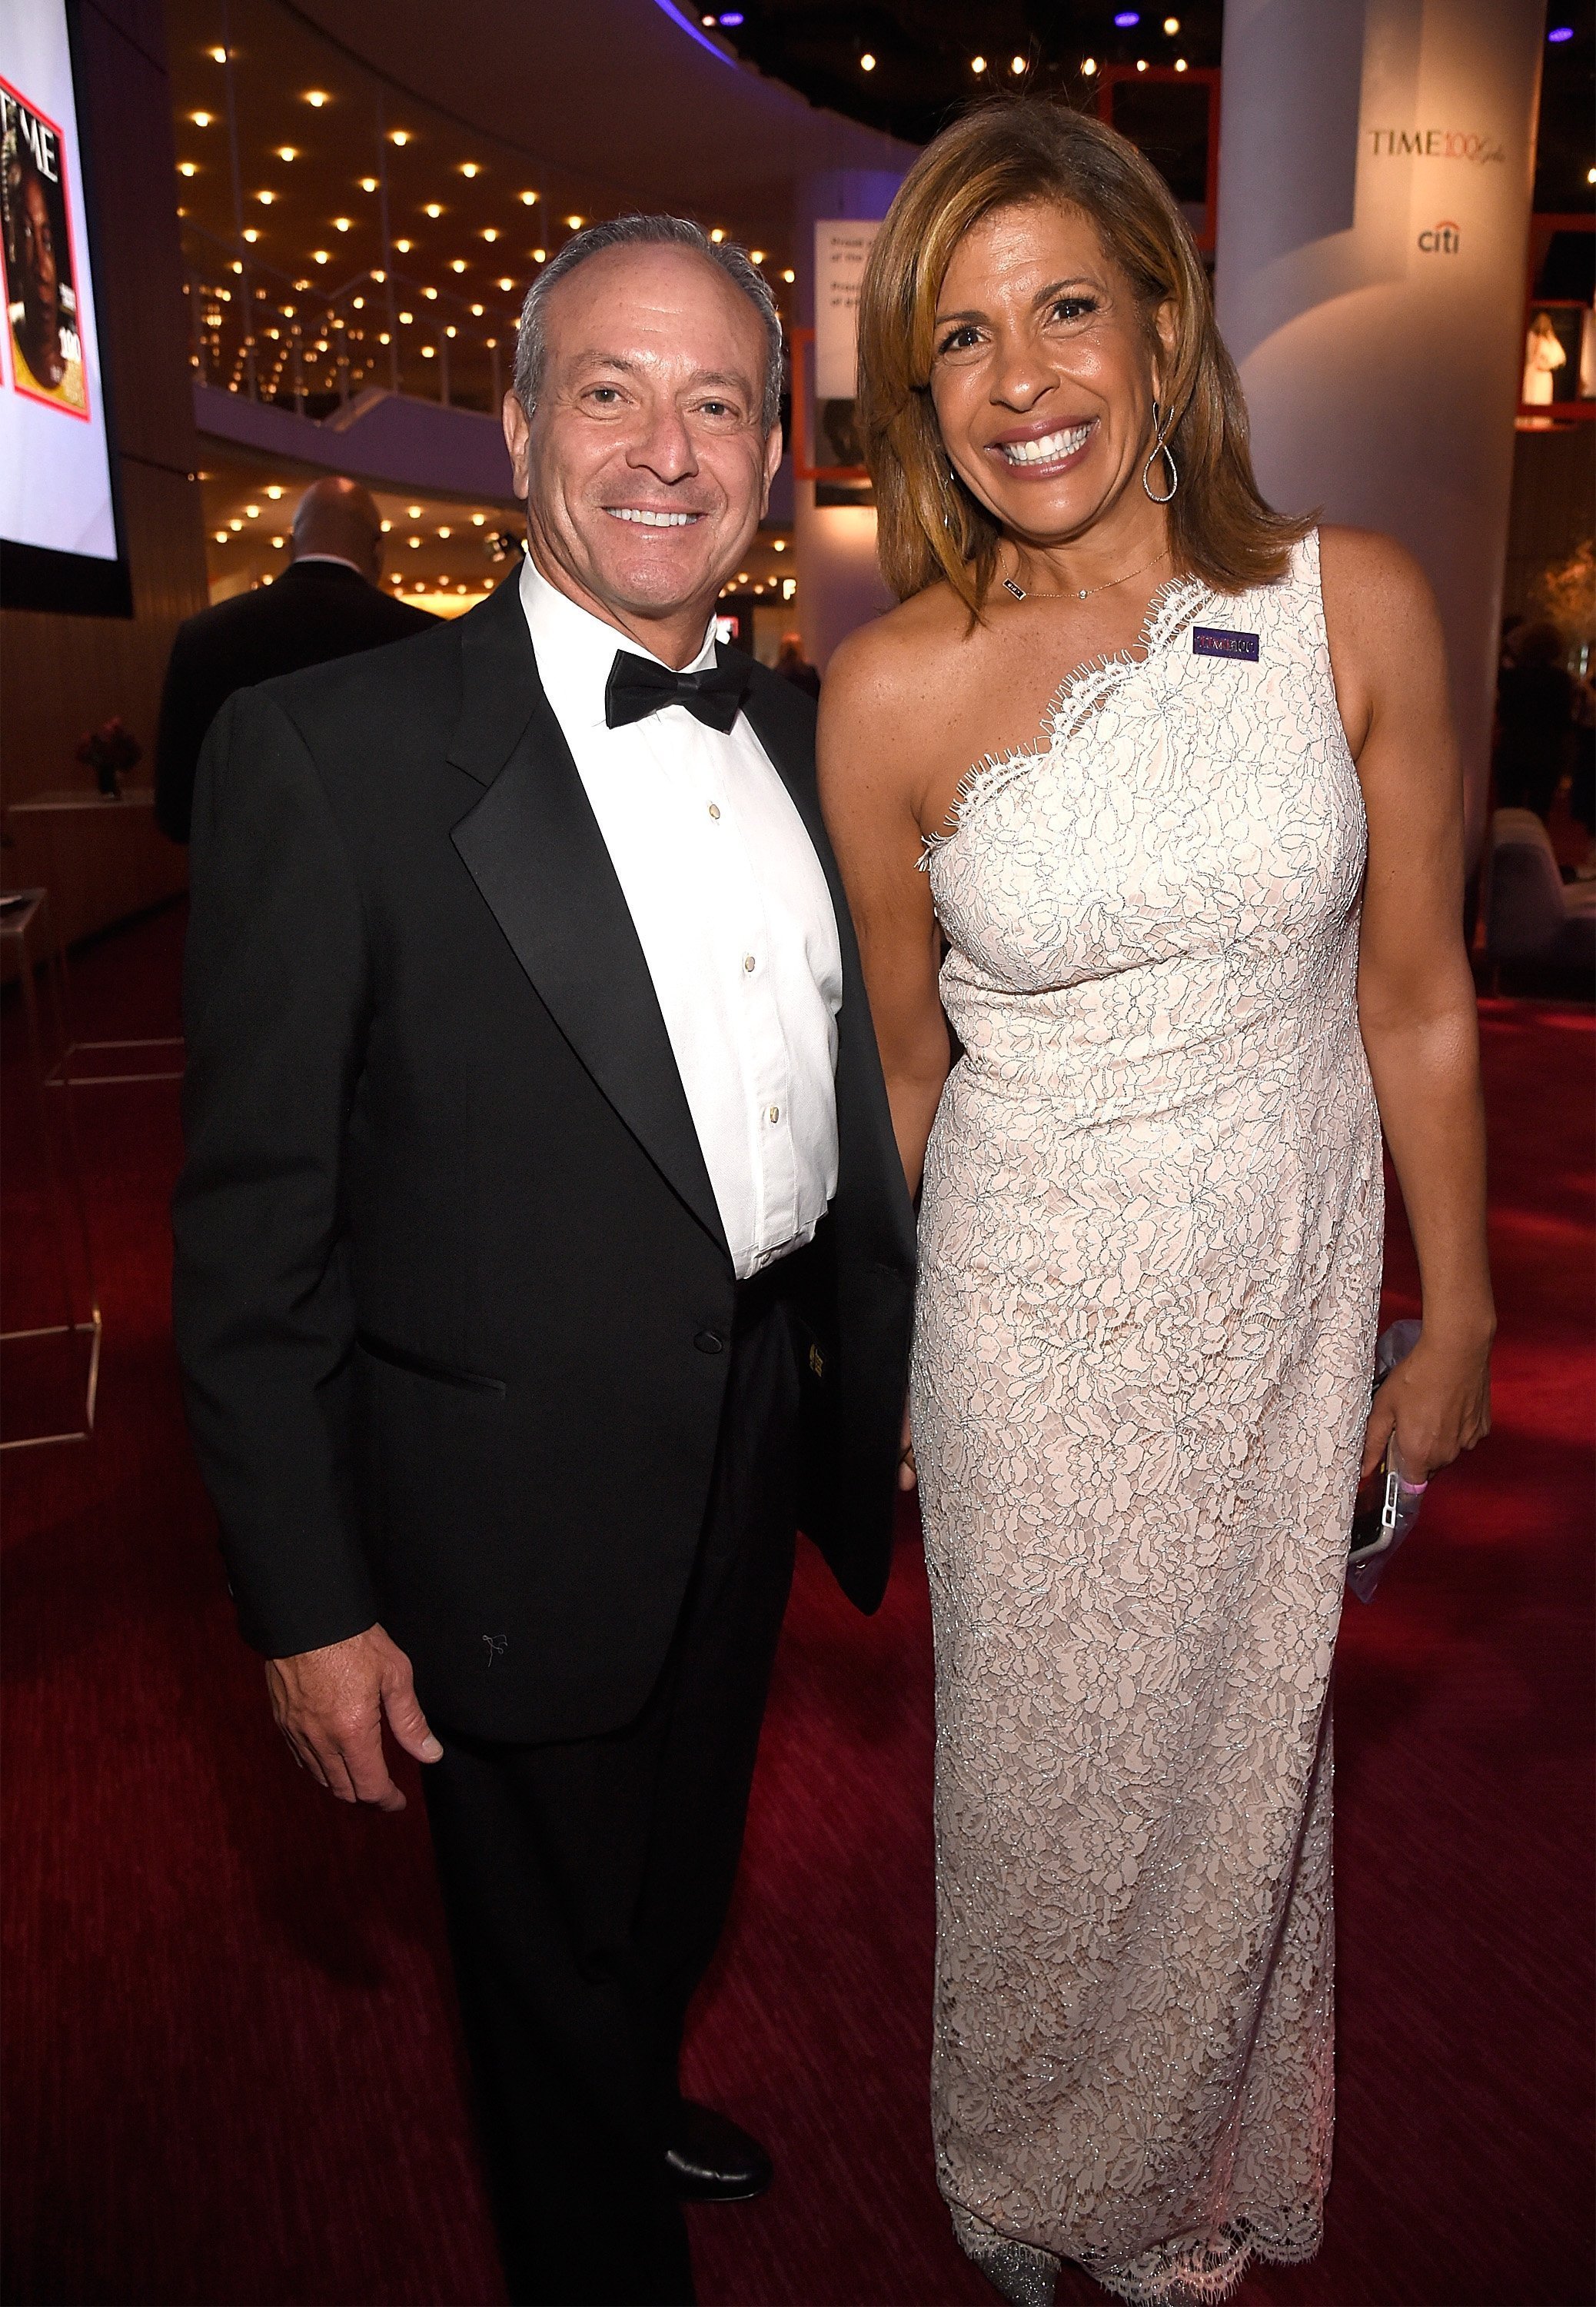 Joel Schiffman and Hoda Kotb attend the Time 100 Gala in New York City on April 24, 2018 | Photo: Getty images